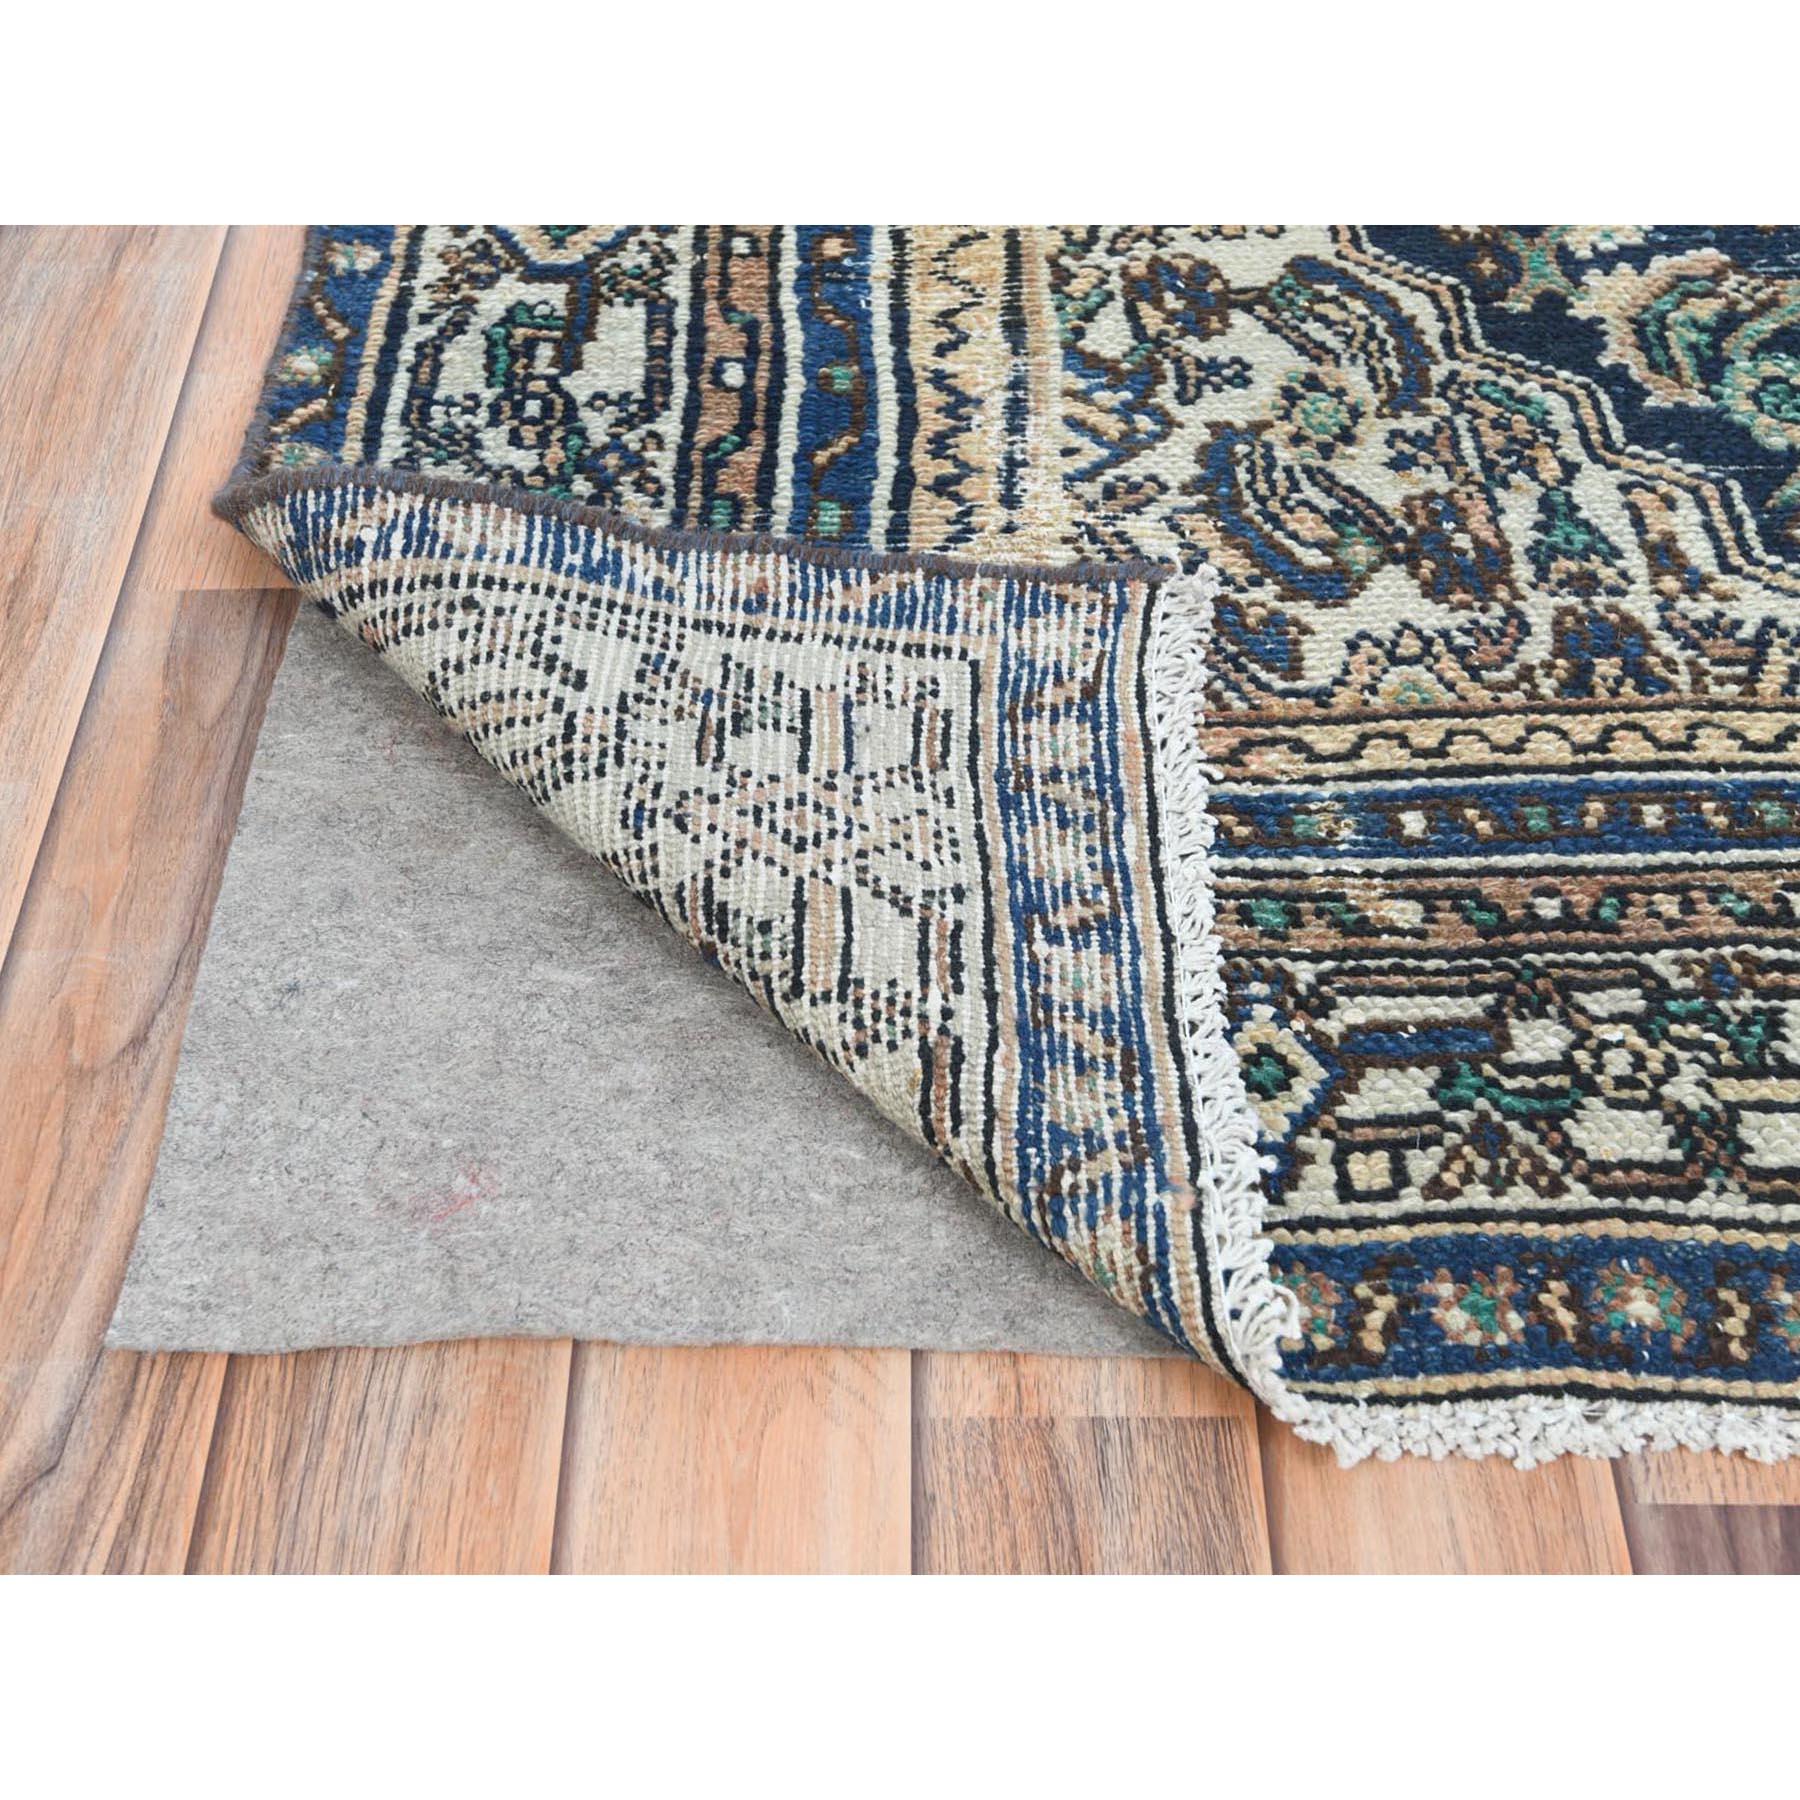 Brown, Vintage Persian Hamadan, Distressed Worn Wool Hand Knotted Rug In Good Condition For Sale In Carlstadt, NJ